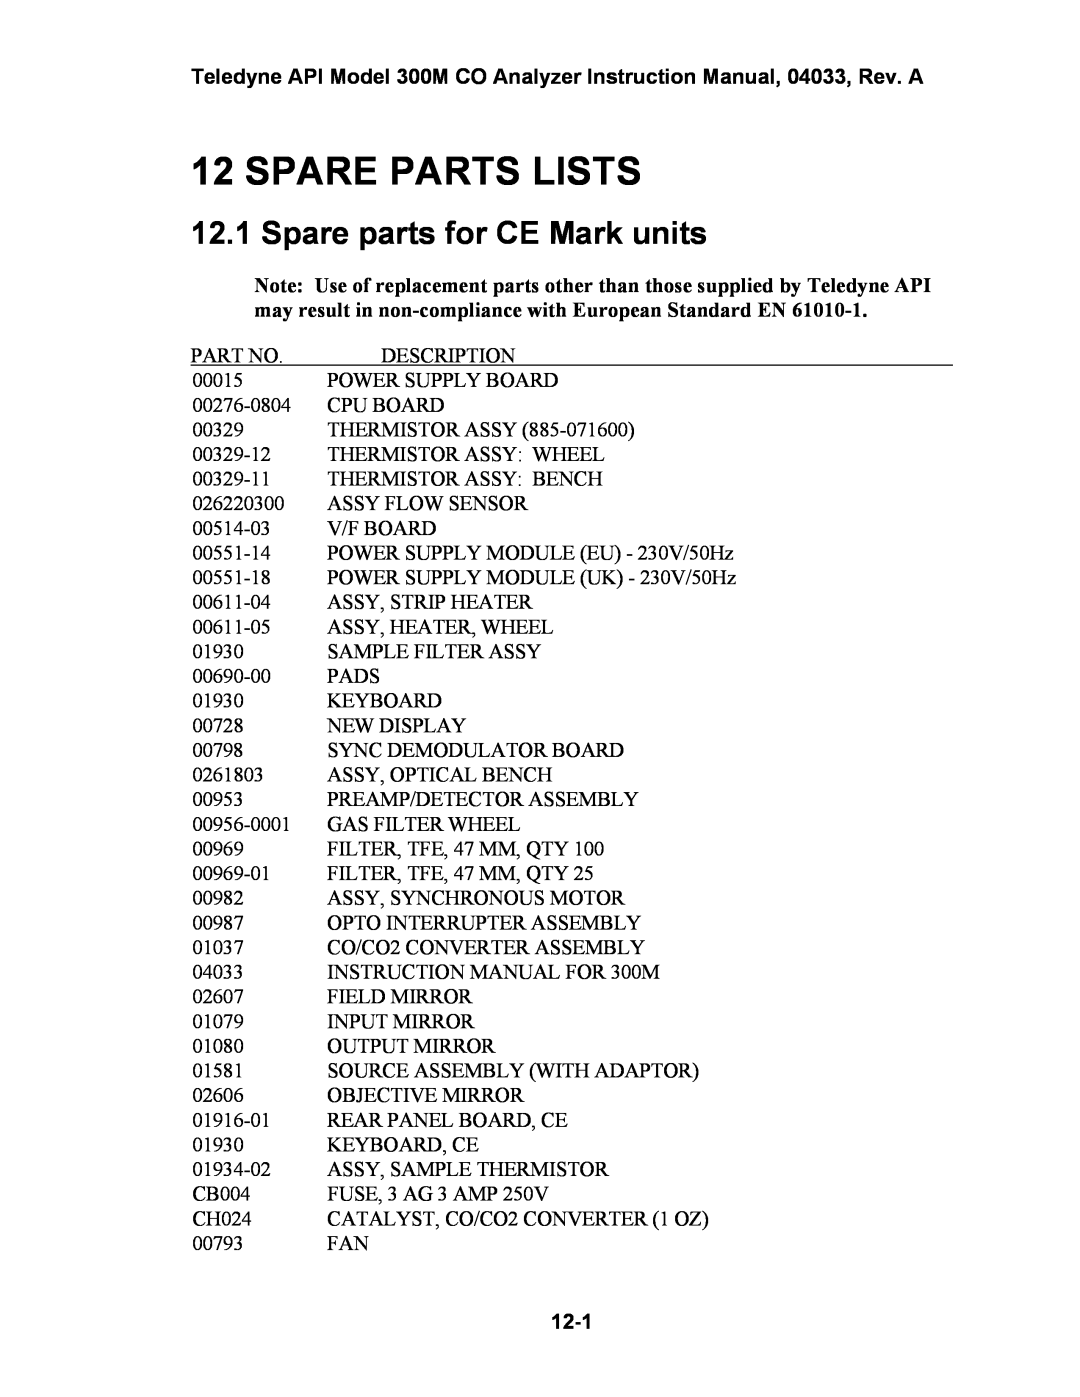 Teledyne 300M instruction manual Spare Parts Lists, Spare parts for CE Mark units, 12-1 